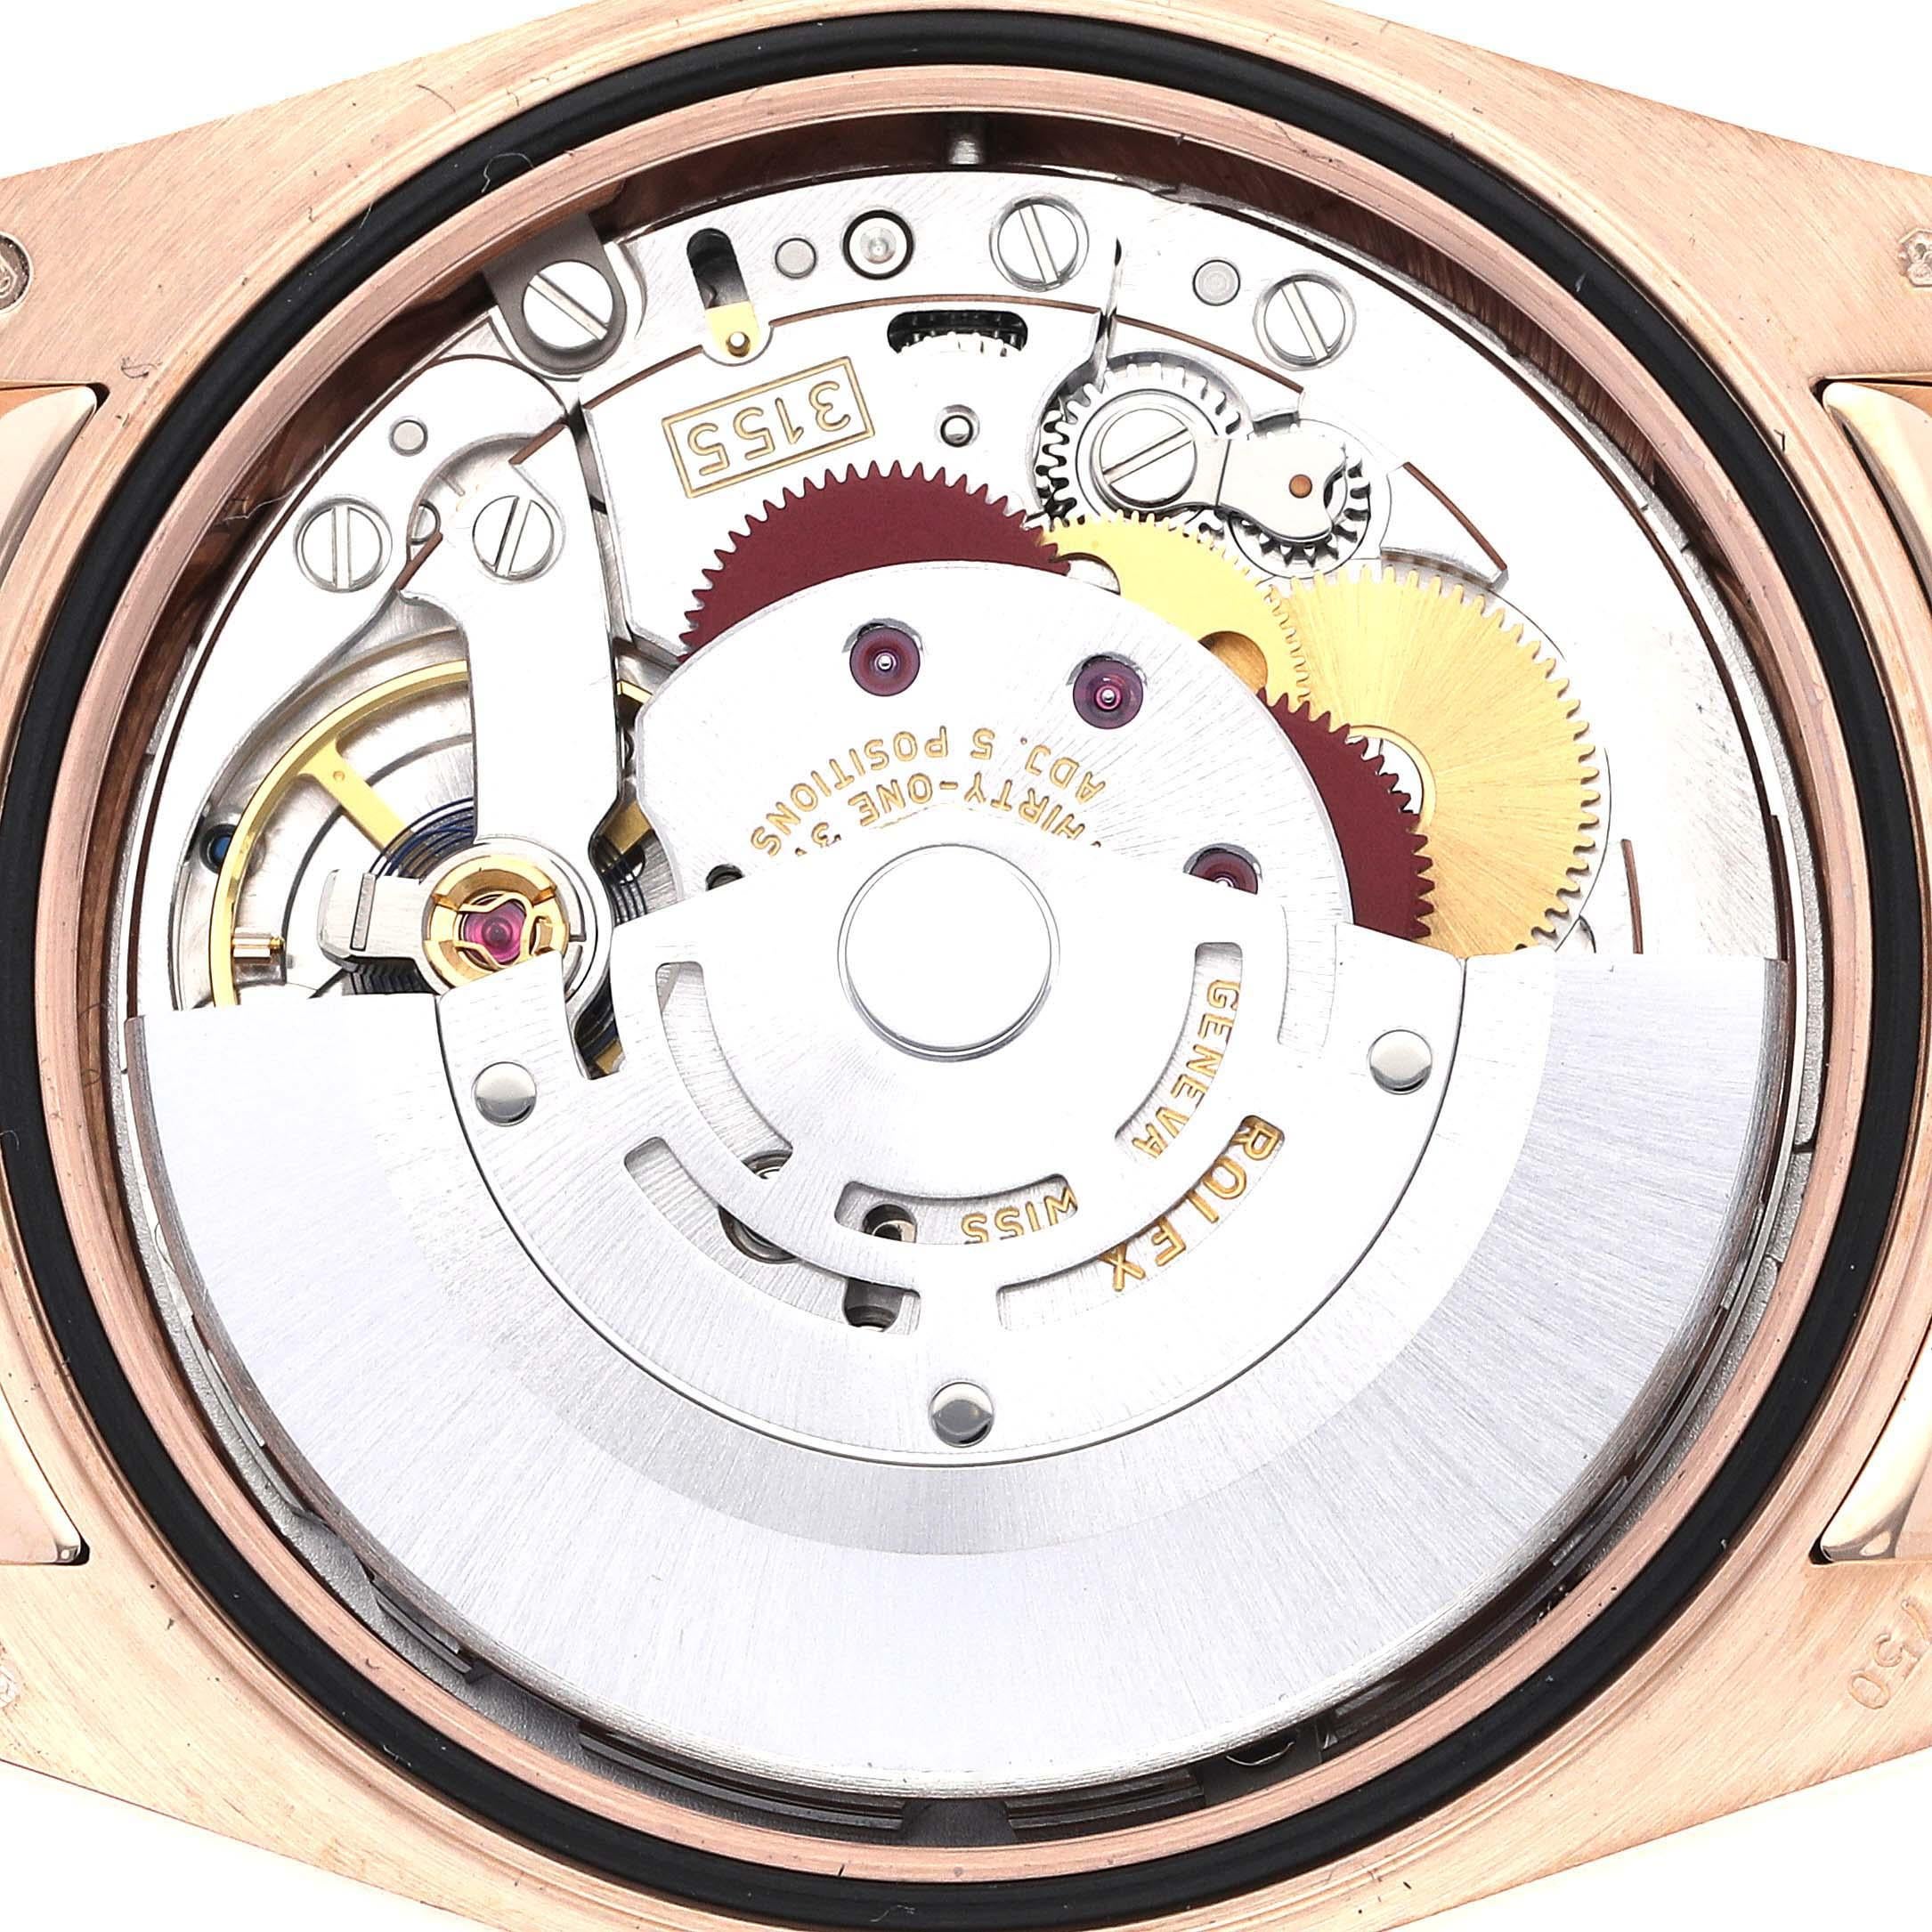 Rolex President Day-Date Rose Gold Chocolate Dial Mens Watch 118135. Officially certified chronometer automatic self-winding movement. 18k rose gold oyster case 36.0 mm in diameter. Rolex logo on the crown. 18k rose gold fluted bezel. Scratch